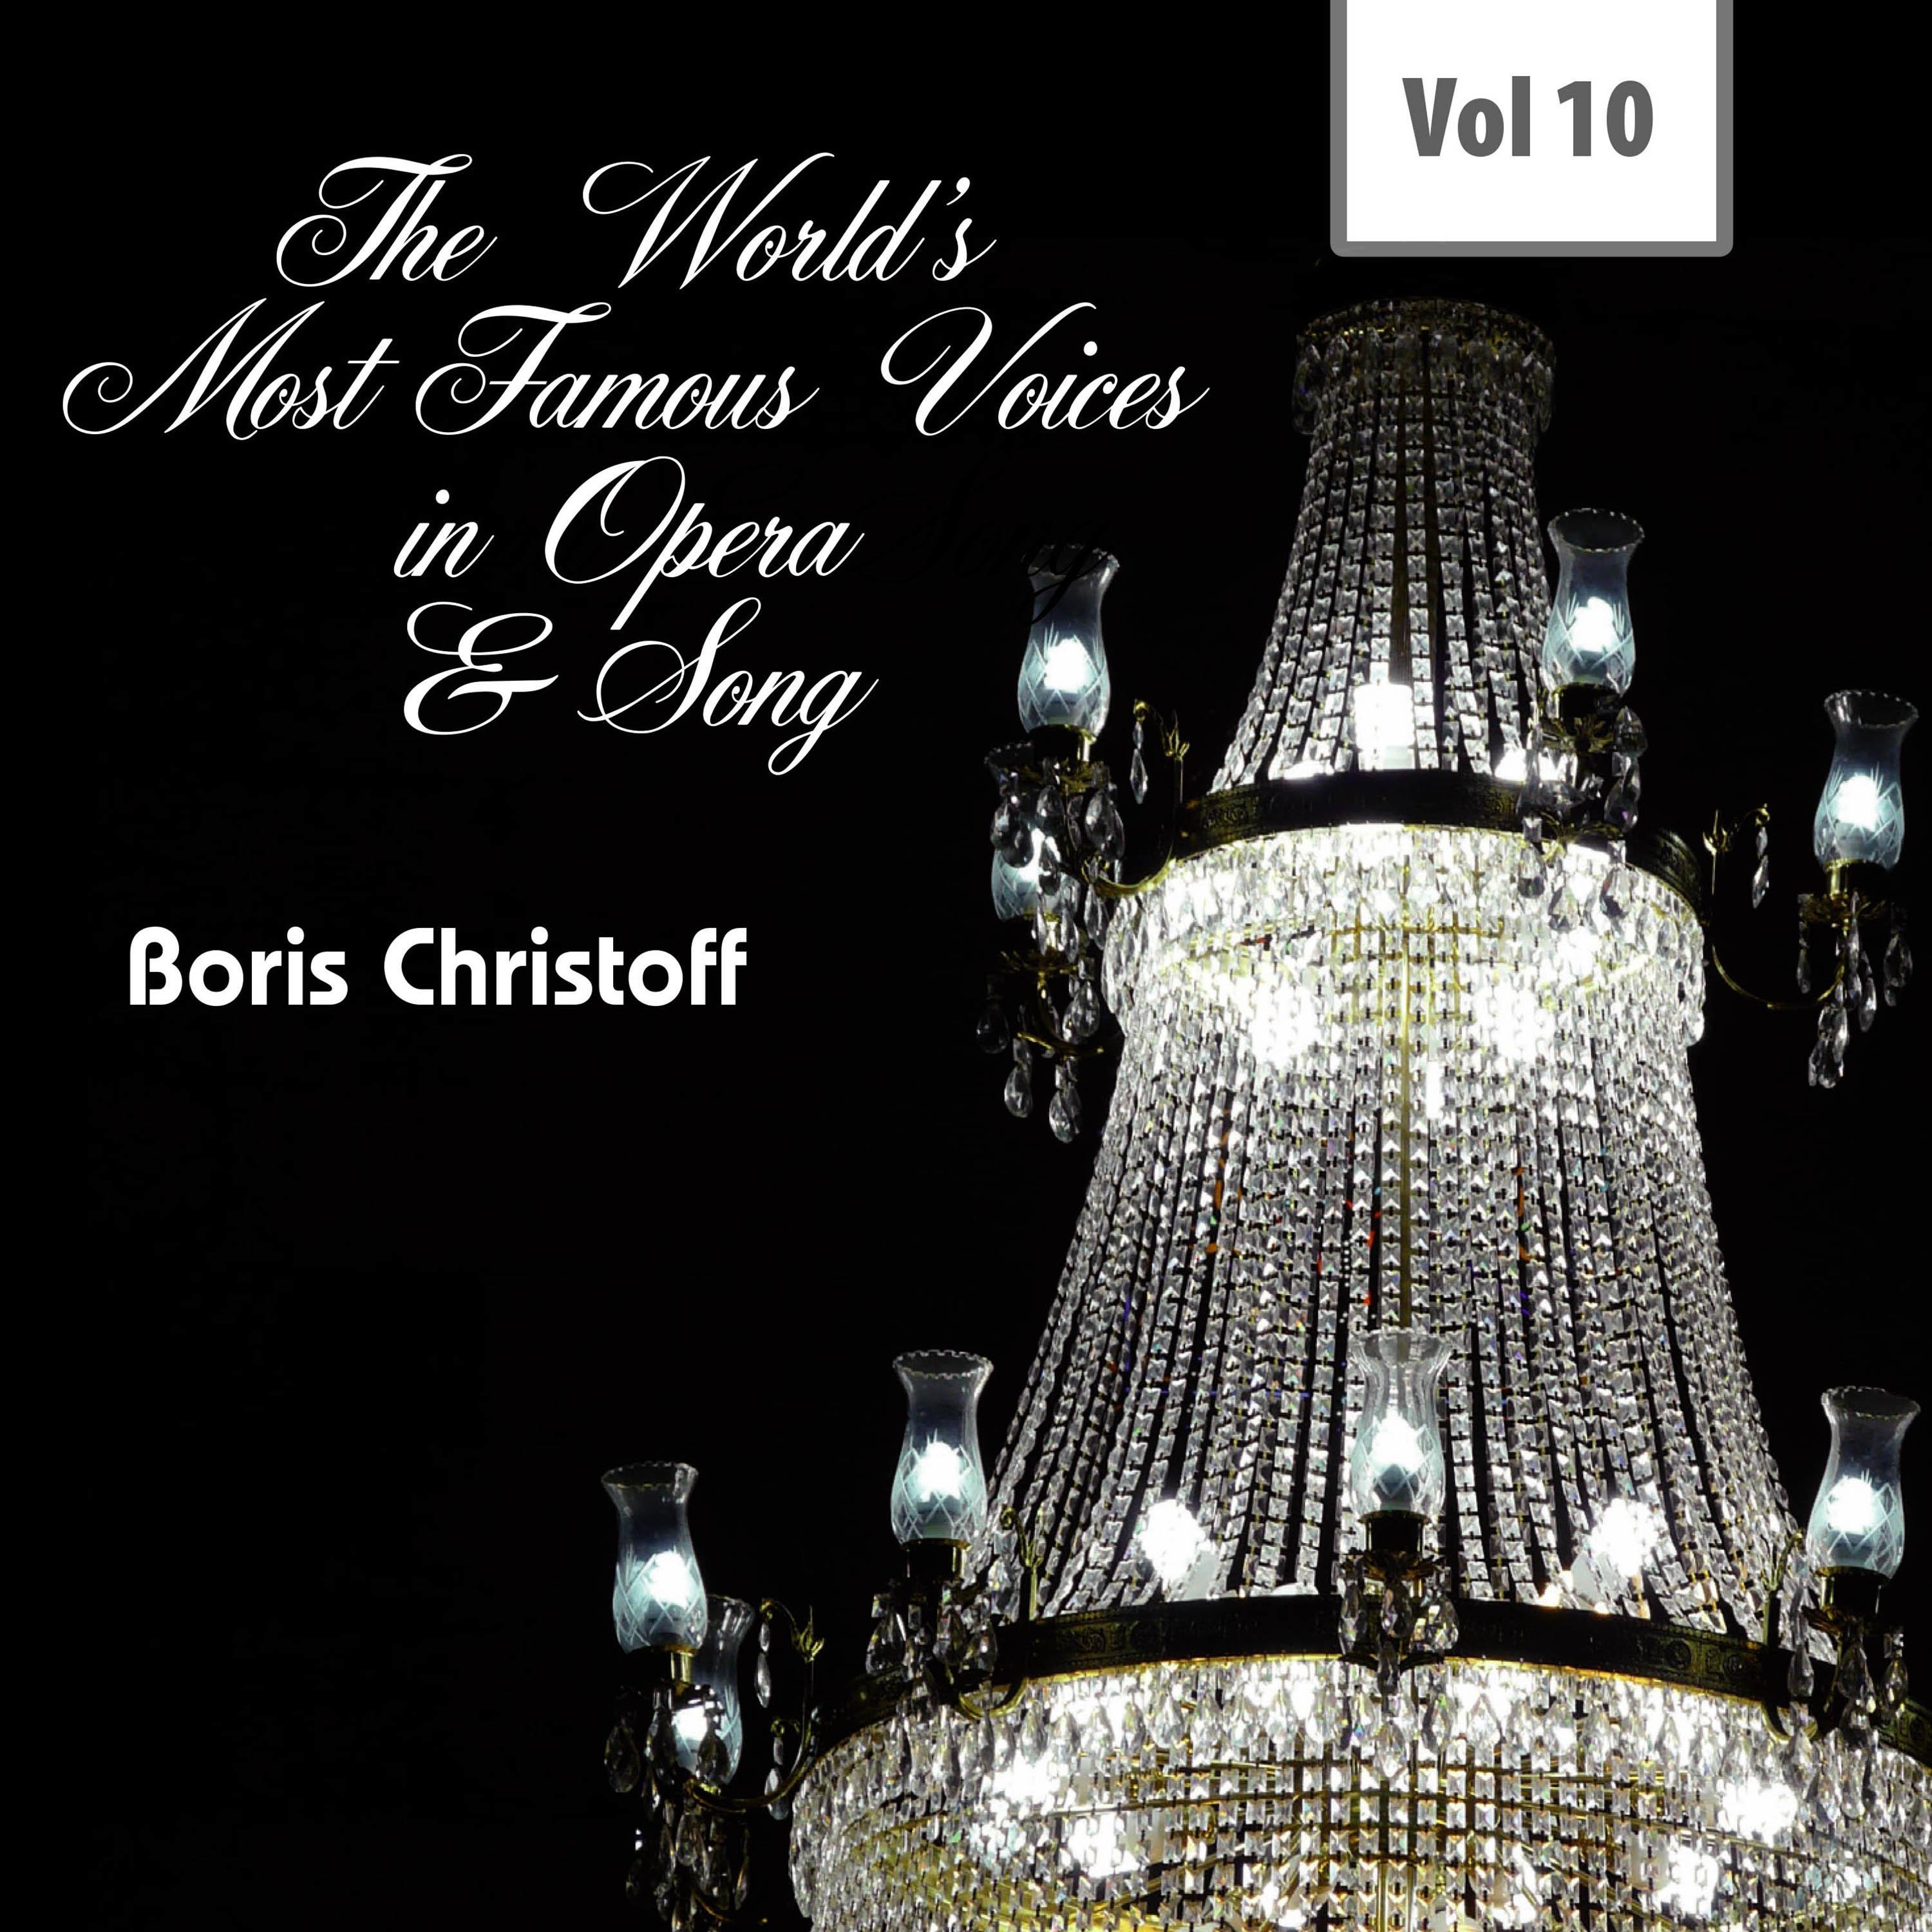 The World's Most Famous Voices in Opera & Song, Vol. 10